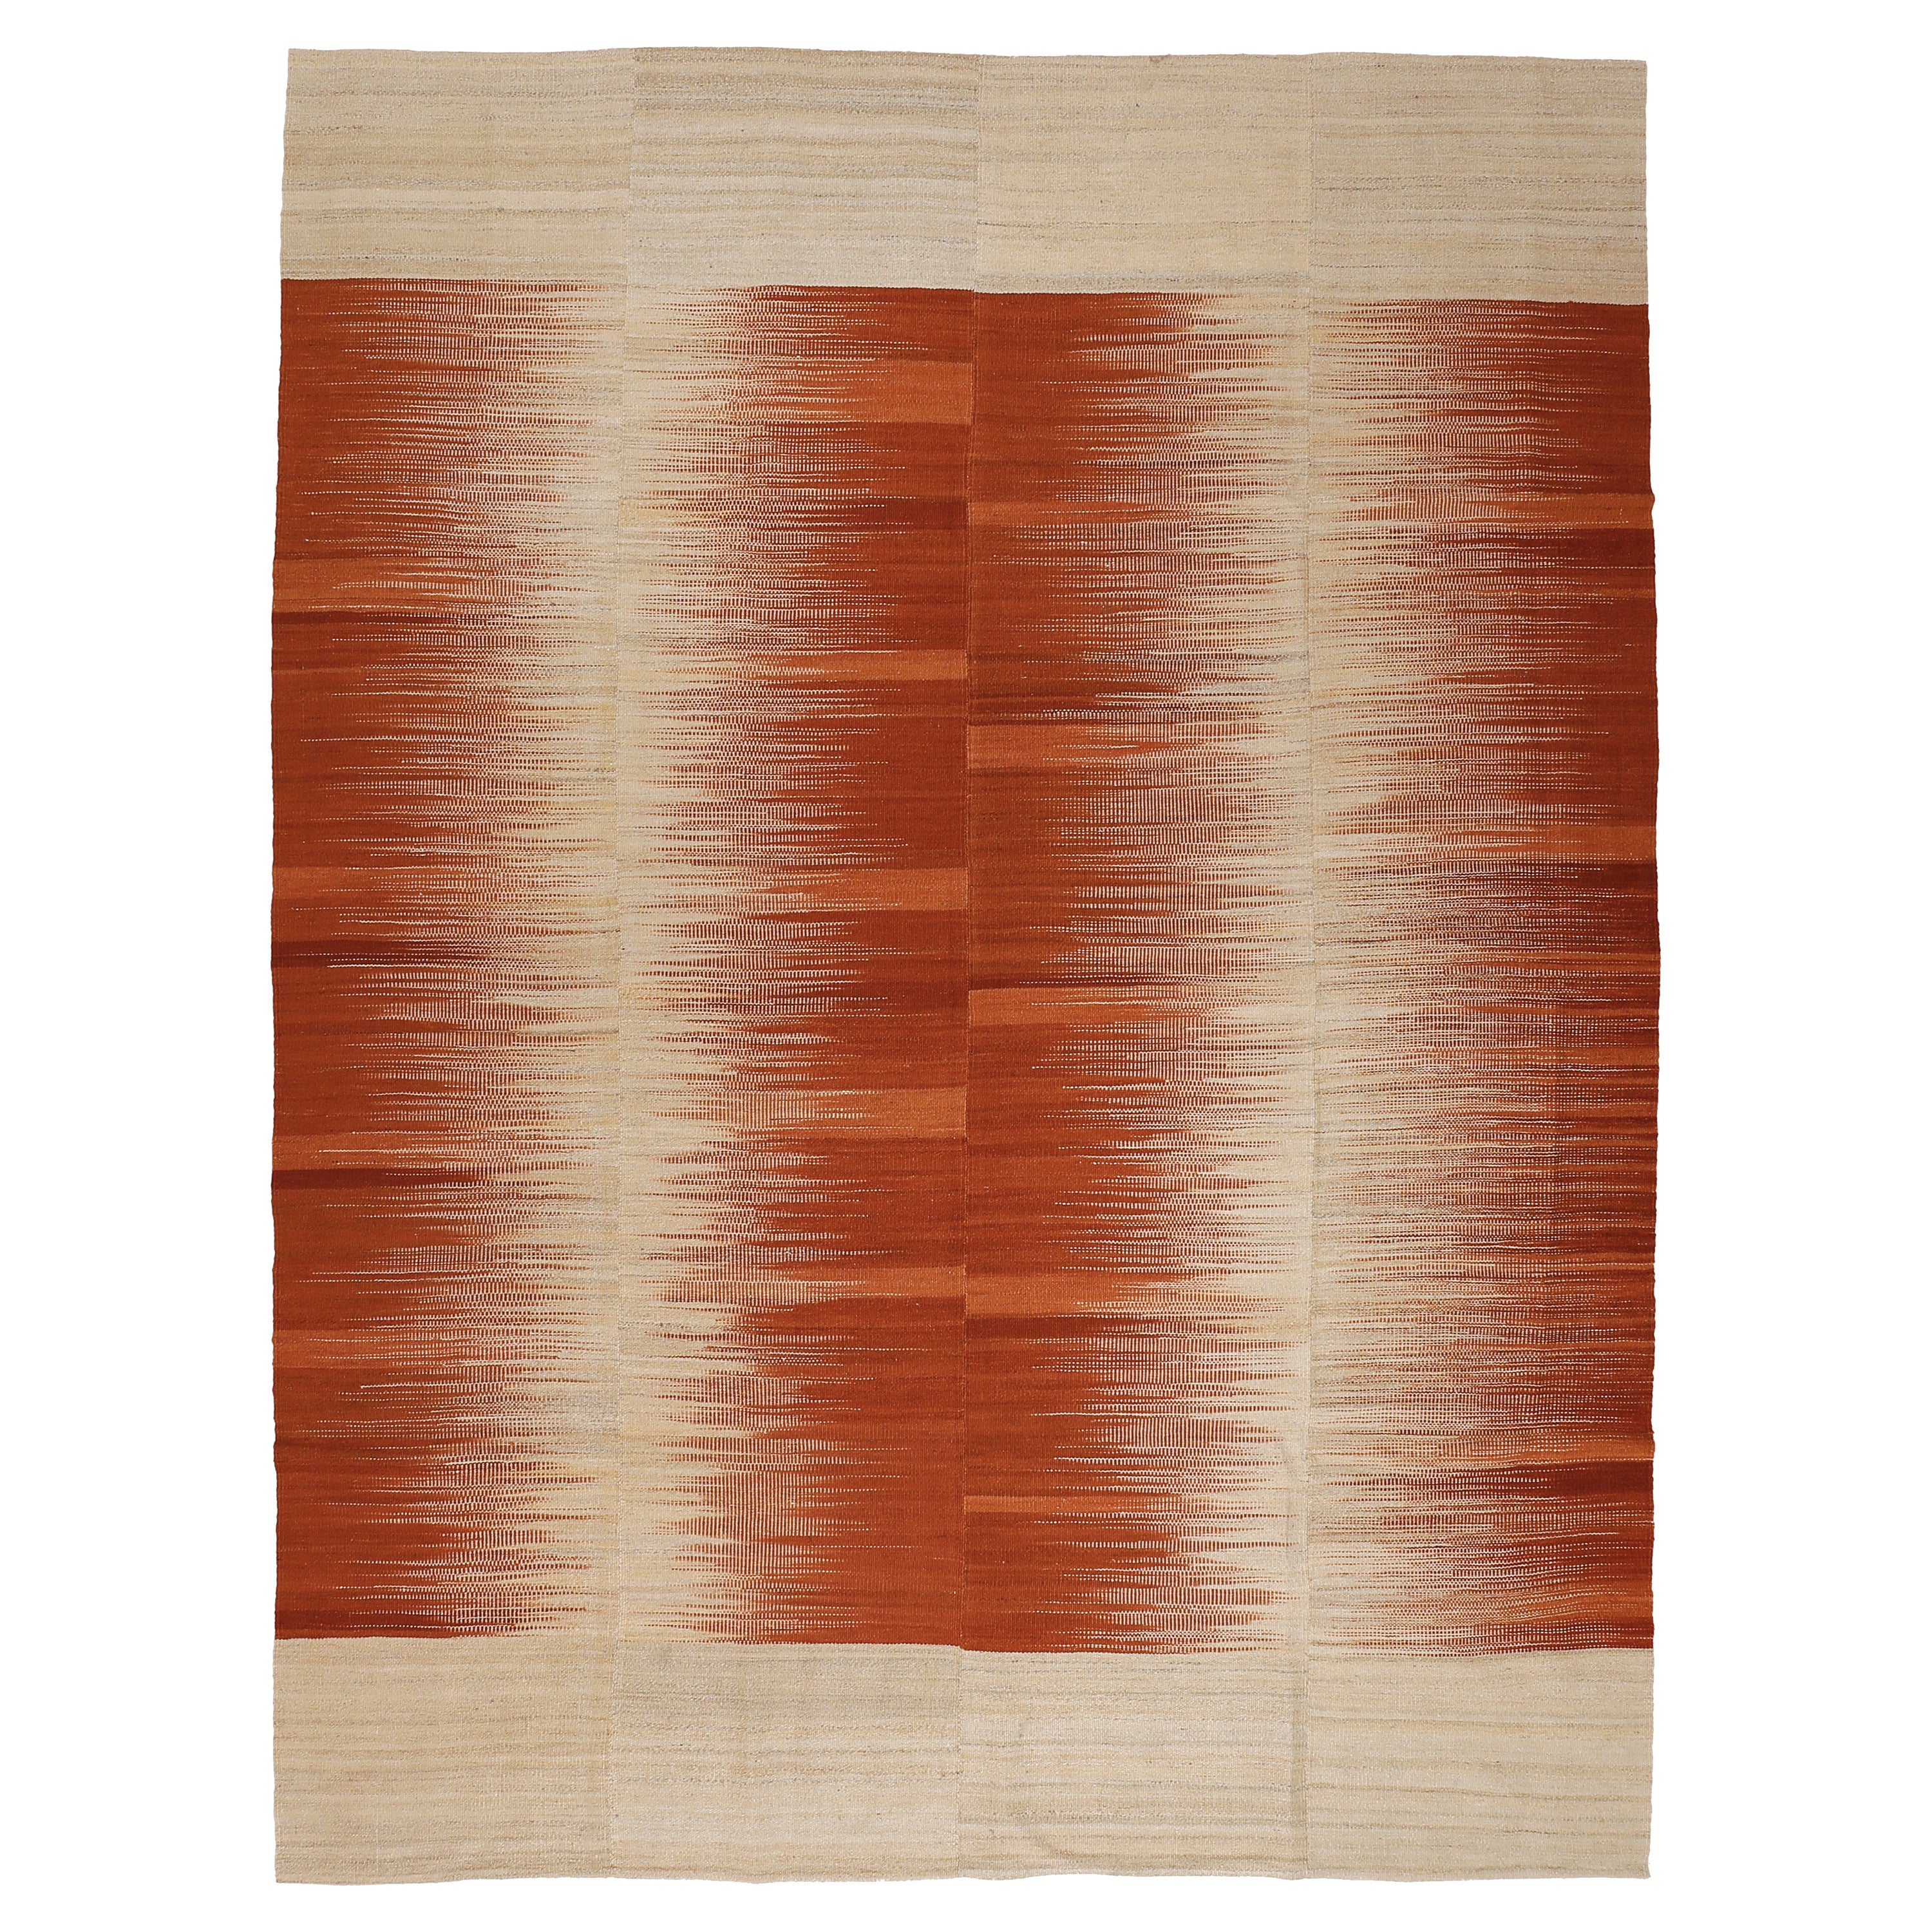 Minimalist Graphic Anatolian Kilim Rug with Brick Red Flame Pattern For Sale